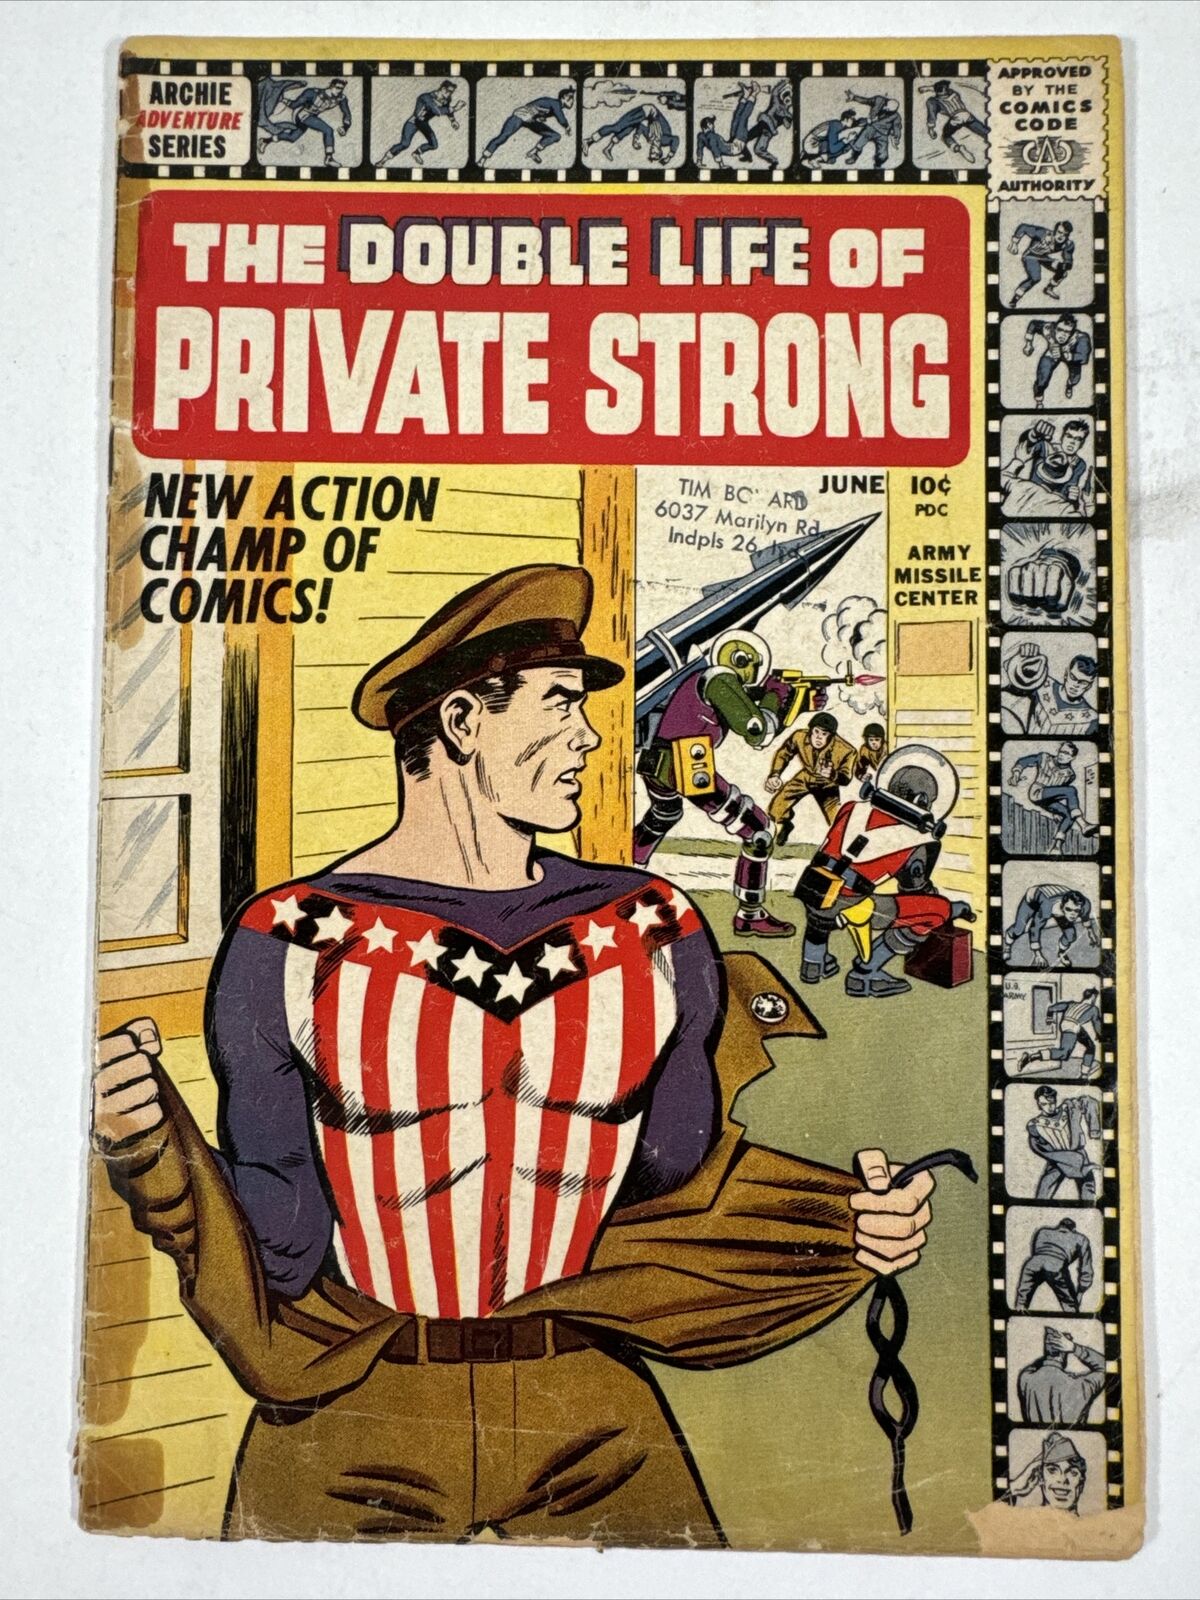 The Double Life of Private Strong #1 Values, Archie 1959